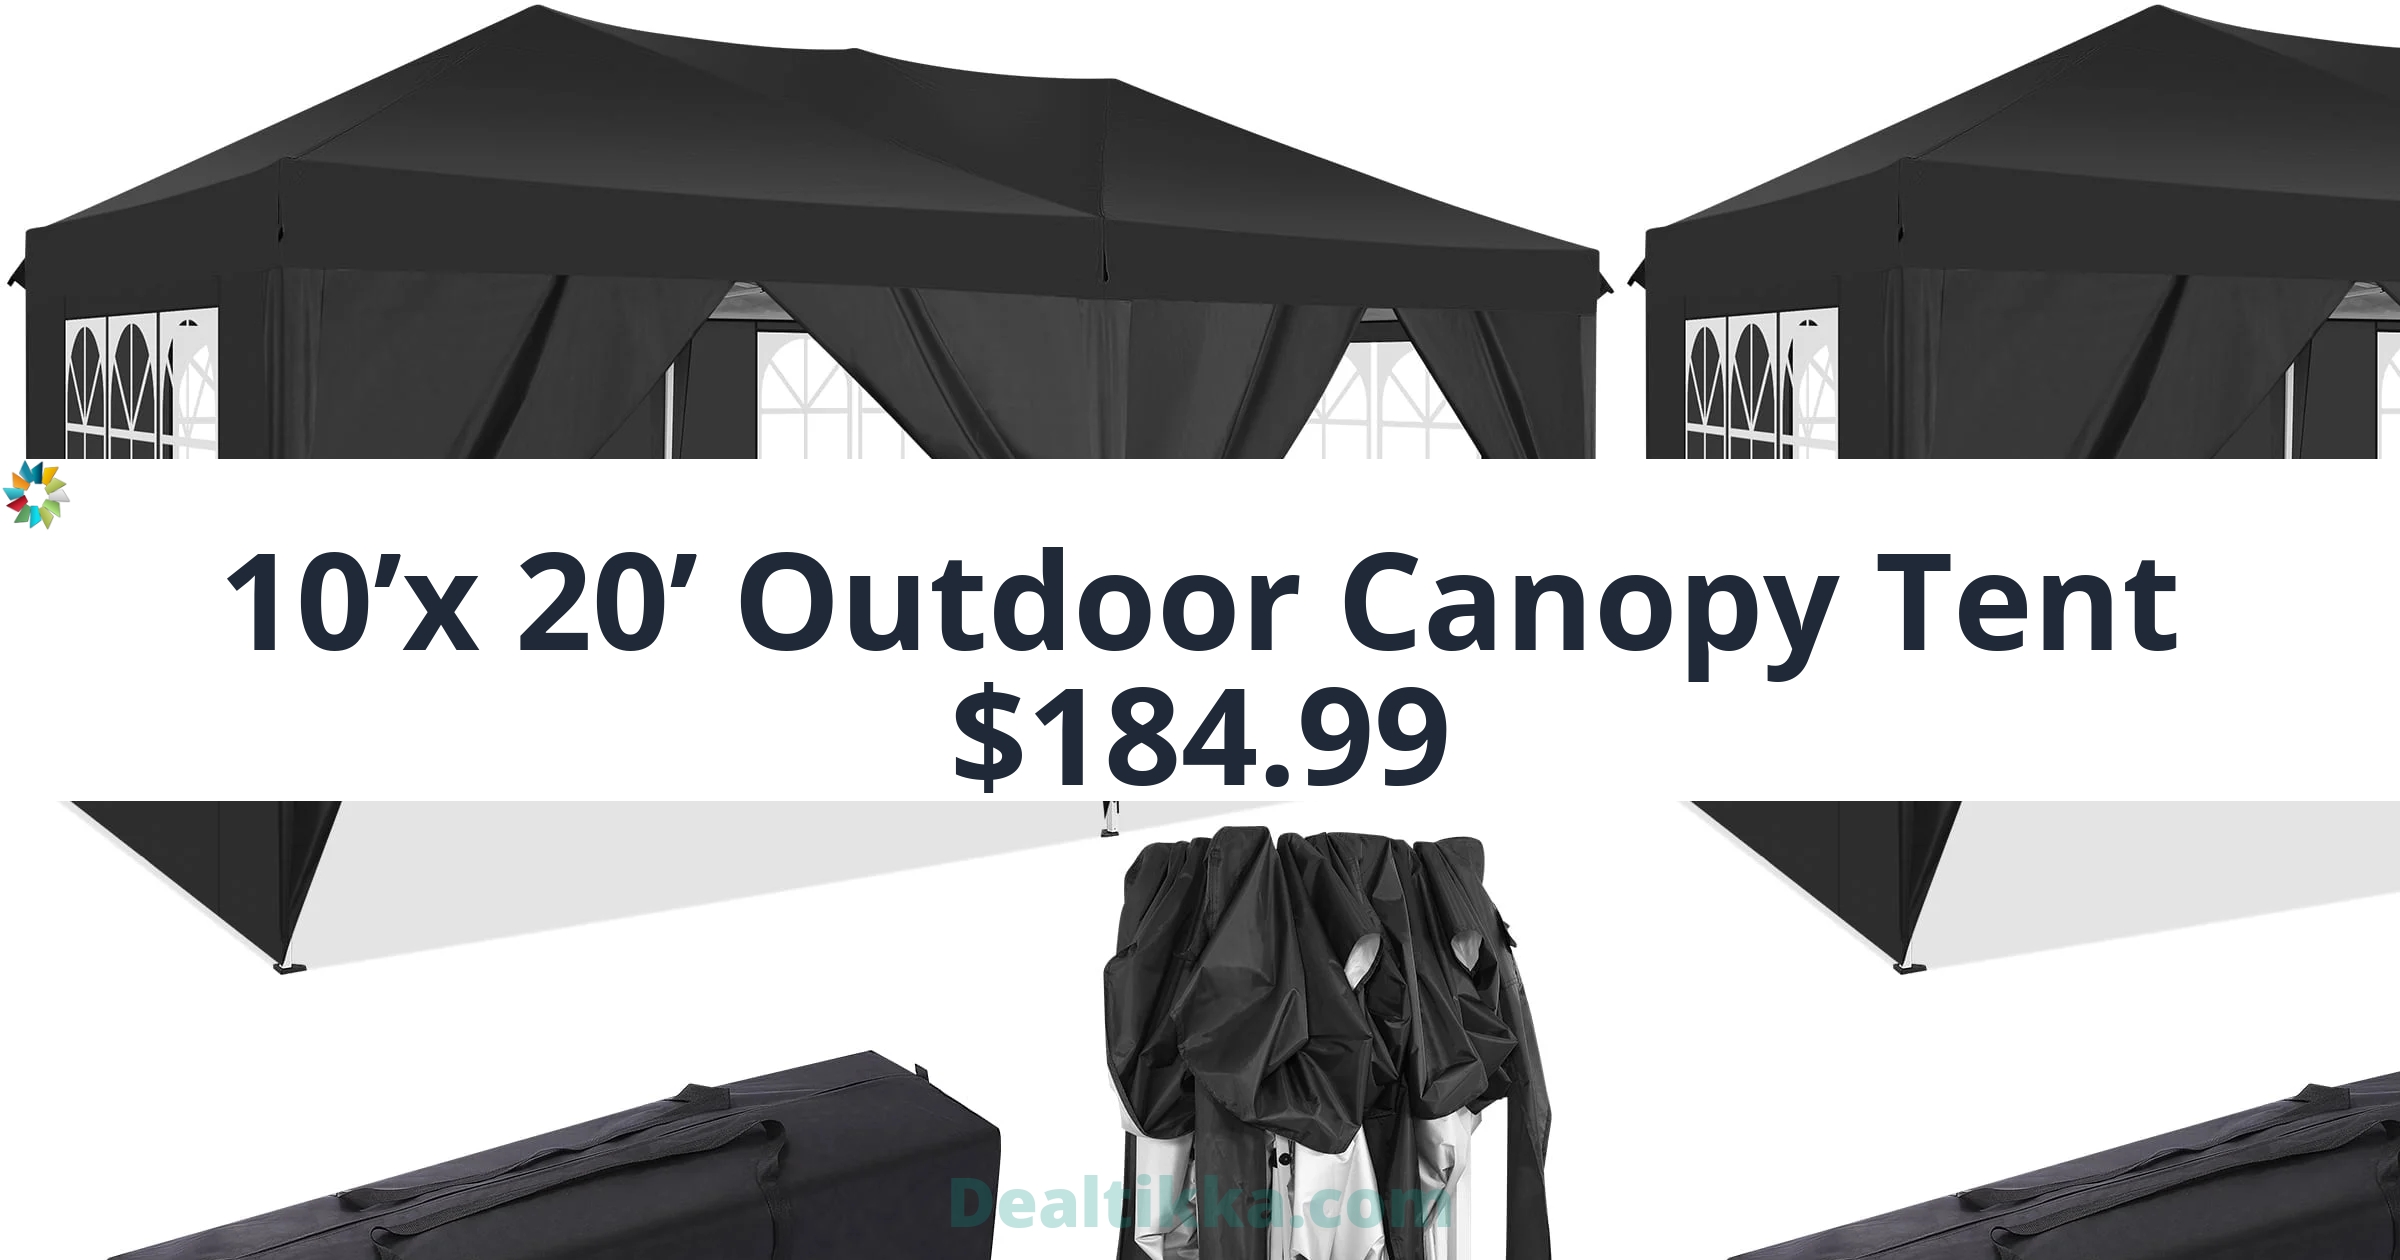 SANOPY-10-x-20-Outdoor-Canopy-Tent-EZ-Pop-Up-Backyard-Portable-Party-Commercial-Instant-Shelter-6-Removable-Sidewalls-Carrying-Bag-Wedding-Picnics-Ca_db2140b9-cd57-451f-8a45-9b7c0bbcde0d.b1bd9f86c5805951f21901160c415004.jpeg&bgTailwind=bg-blueGray-200&footer=Dealtikka.com&footerTailwind=text-teal-600%20font-black%20opacity-25%20text-3xl&containerTailwind=bg-white&t=1717382698576&refresh=1